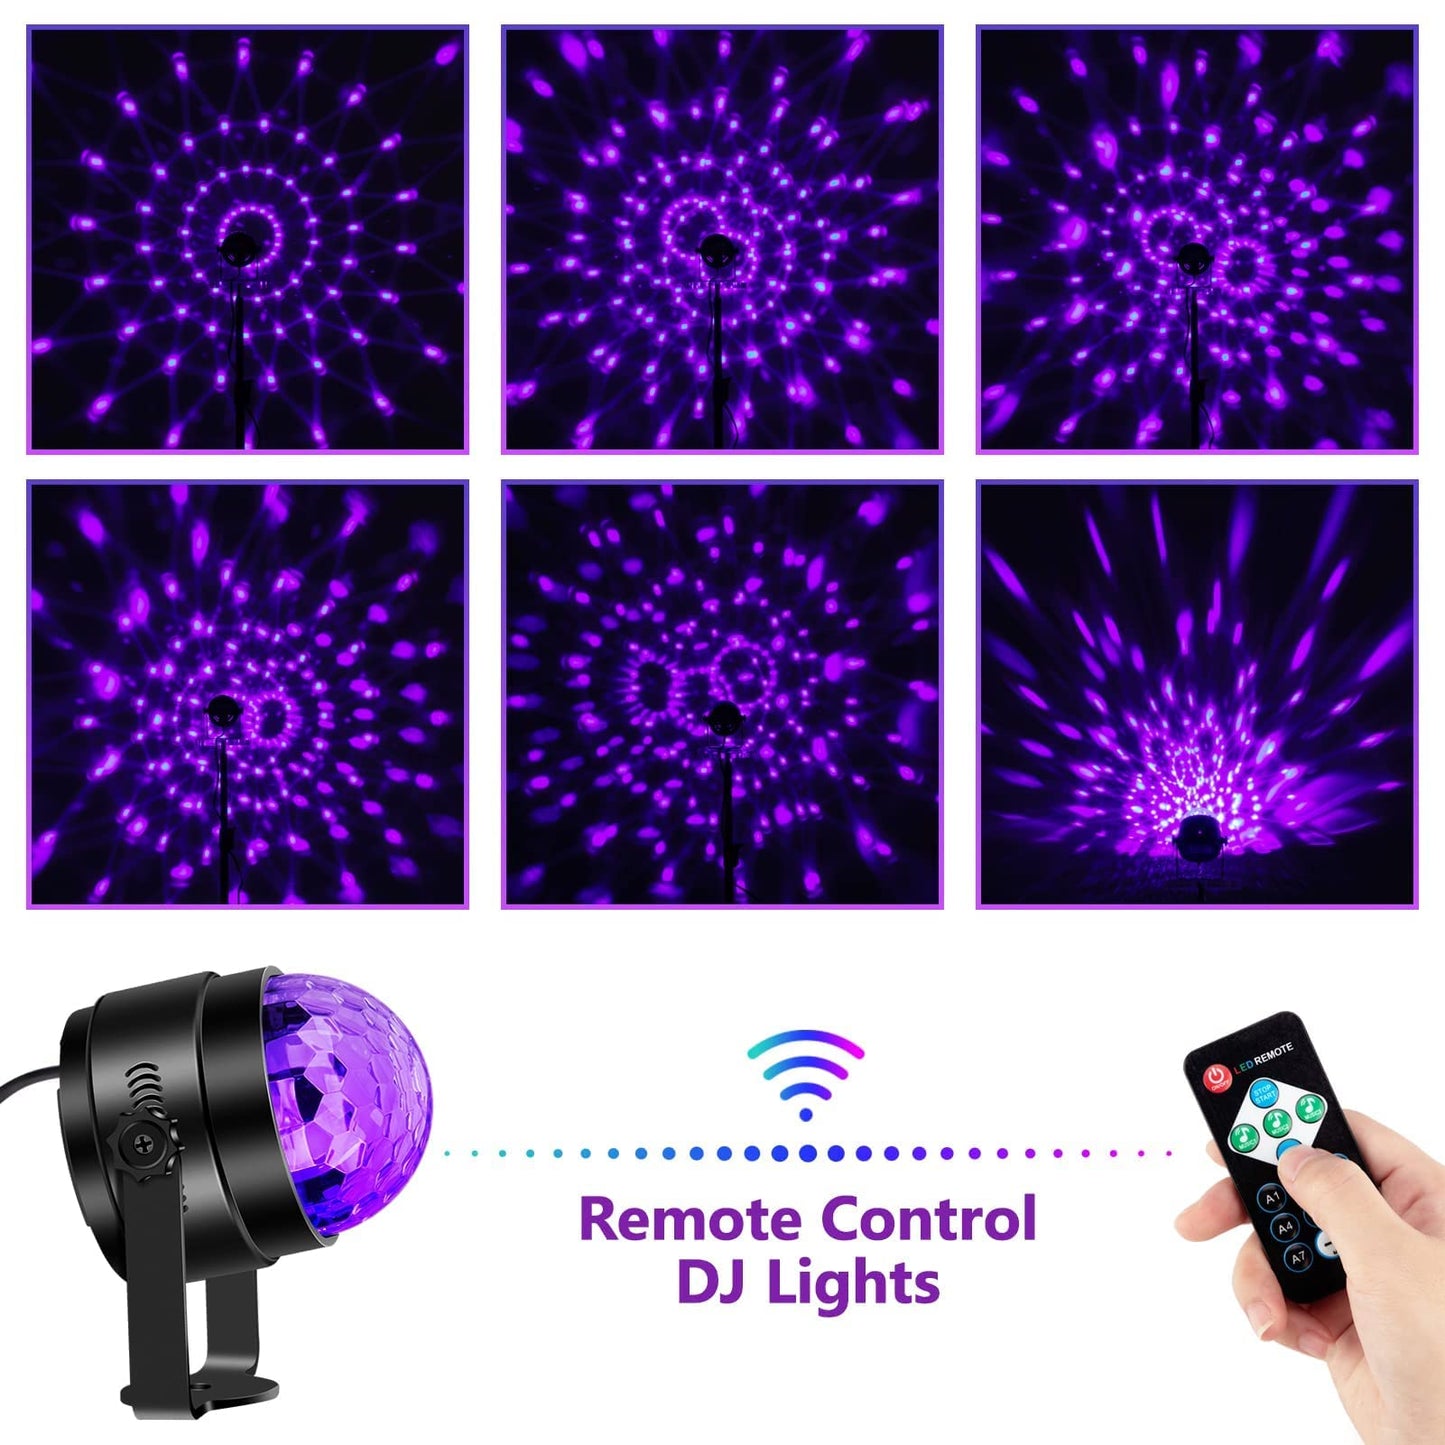 GARVEE Black Light for Glow Party 6W UV LED Disco Ball Strobe Lights Sound Activated with RC